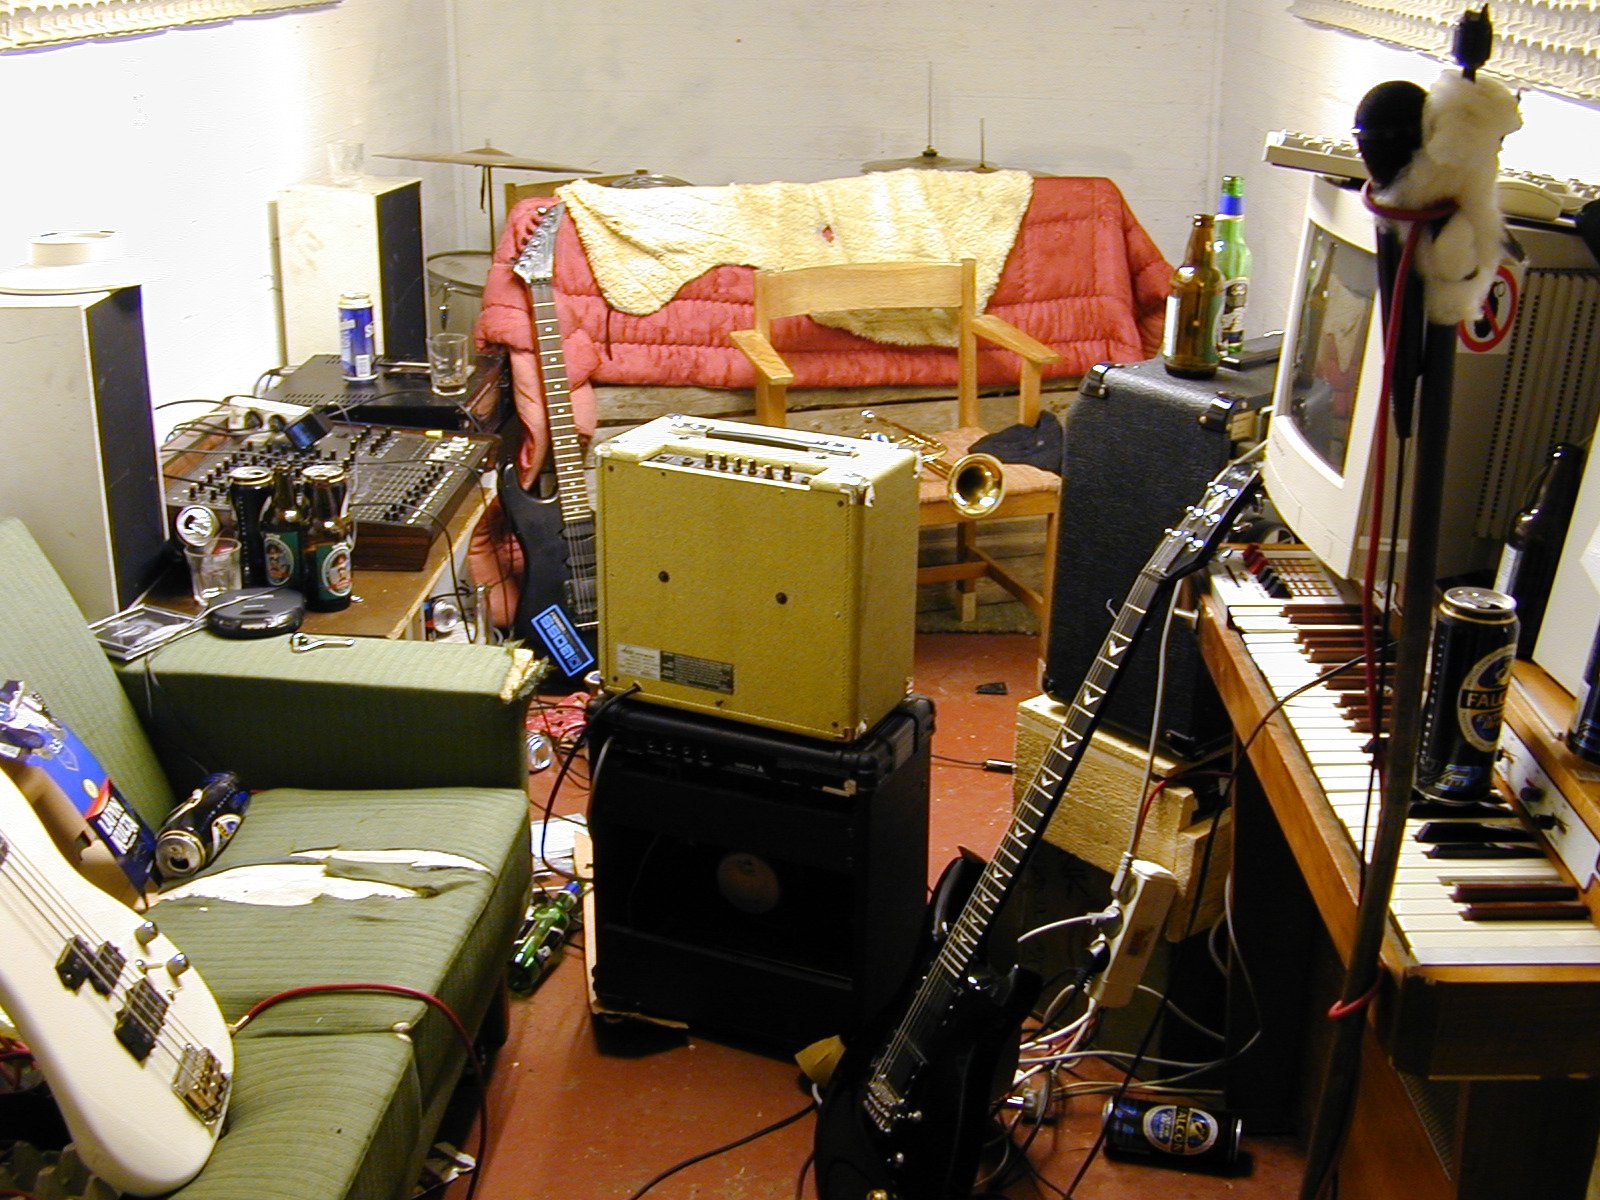 the room is cluttered with guitars and musical equipment